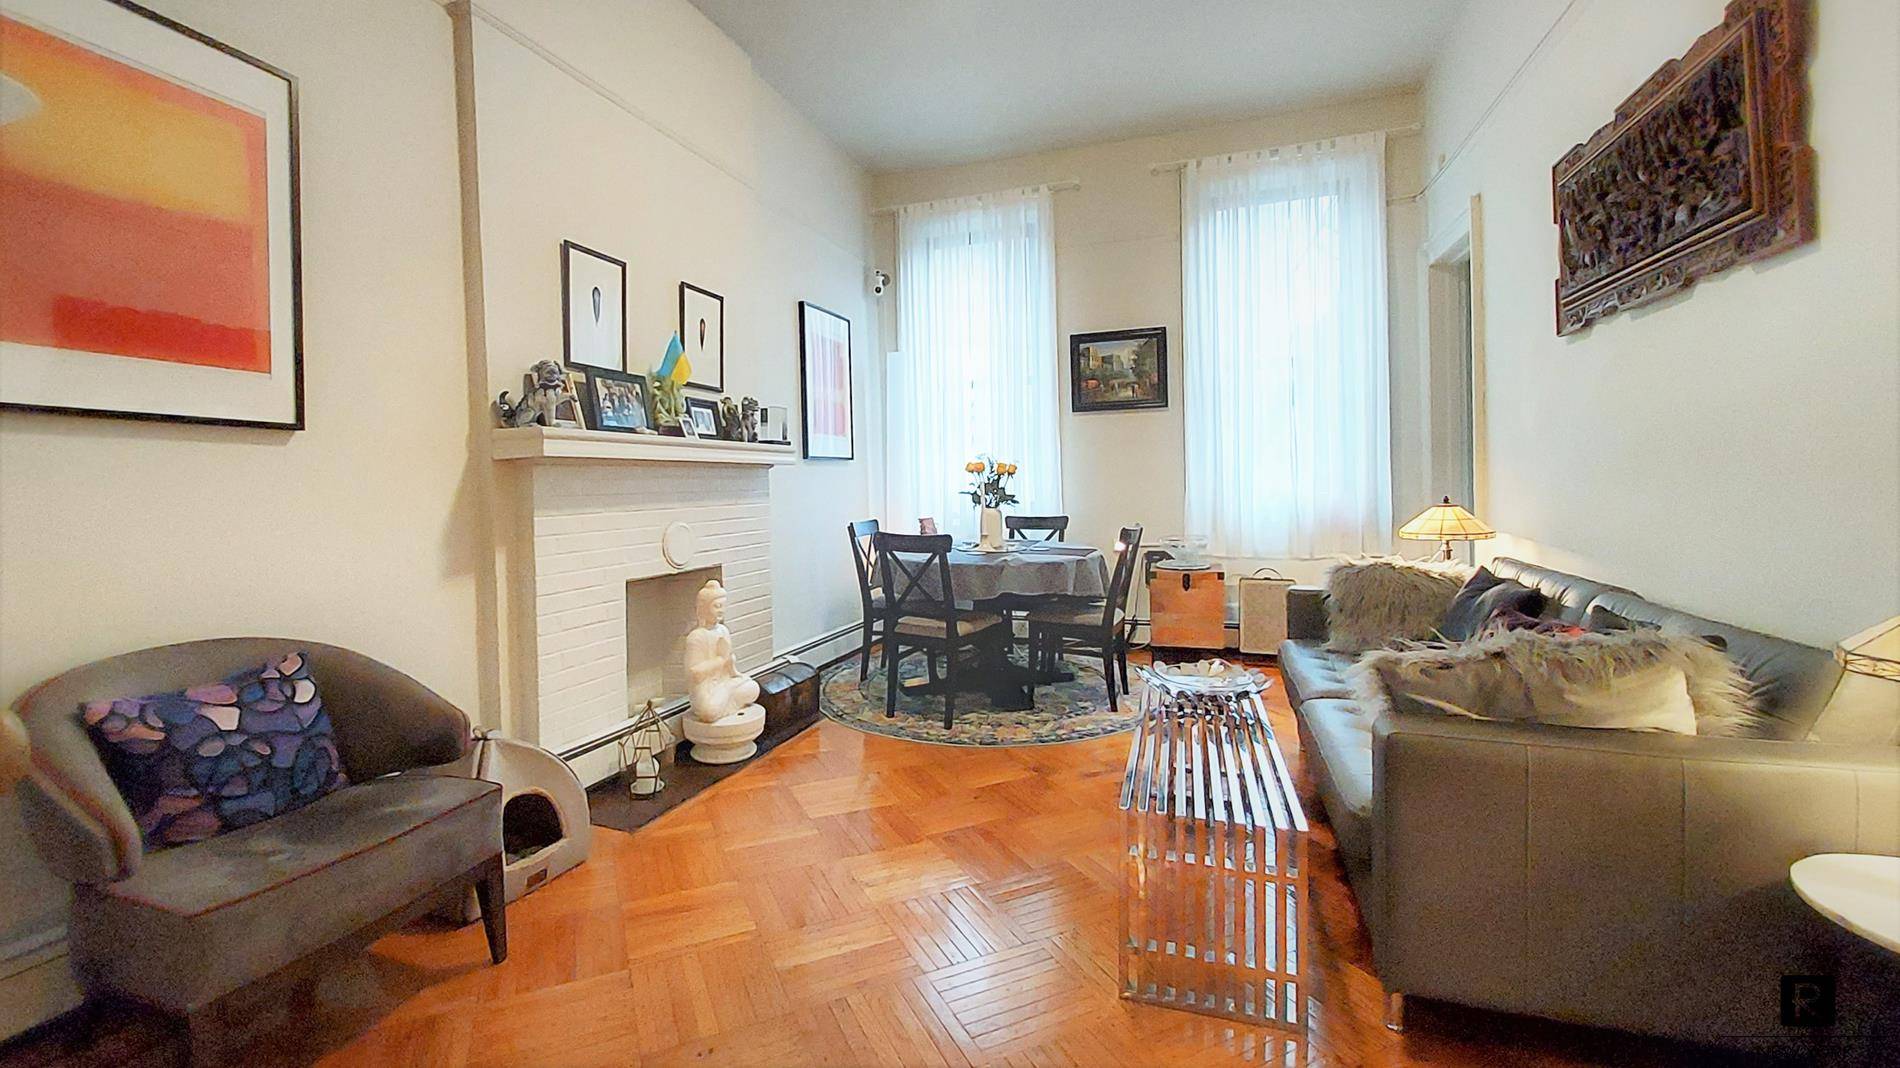 Spacious Sunny Pet Friendly 'Floorthrough 1 Bed Home Office Den' offers King Sized Bedroom in a Generously Proportioned Prewar Floorthrough Featuring a Windowed Kitchen w Dishwasher, Den Home Office with ...